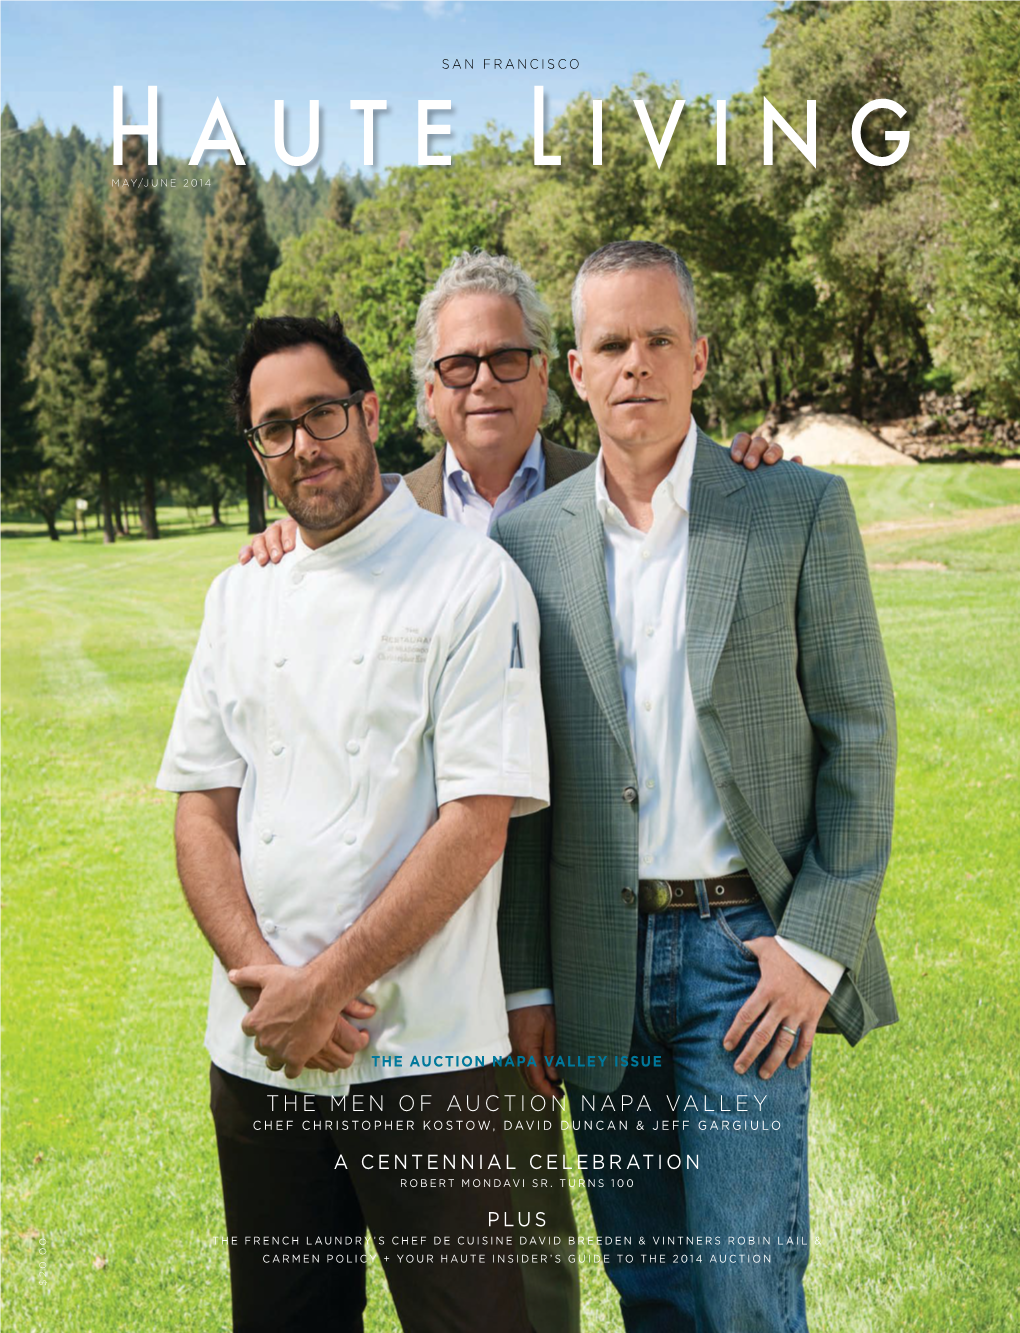 The Men of Auction Napa Valley